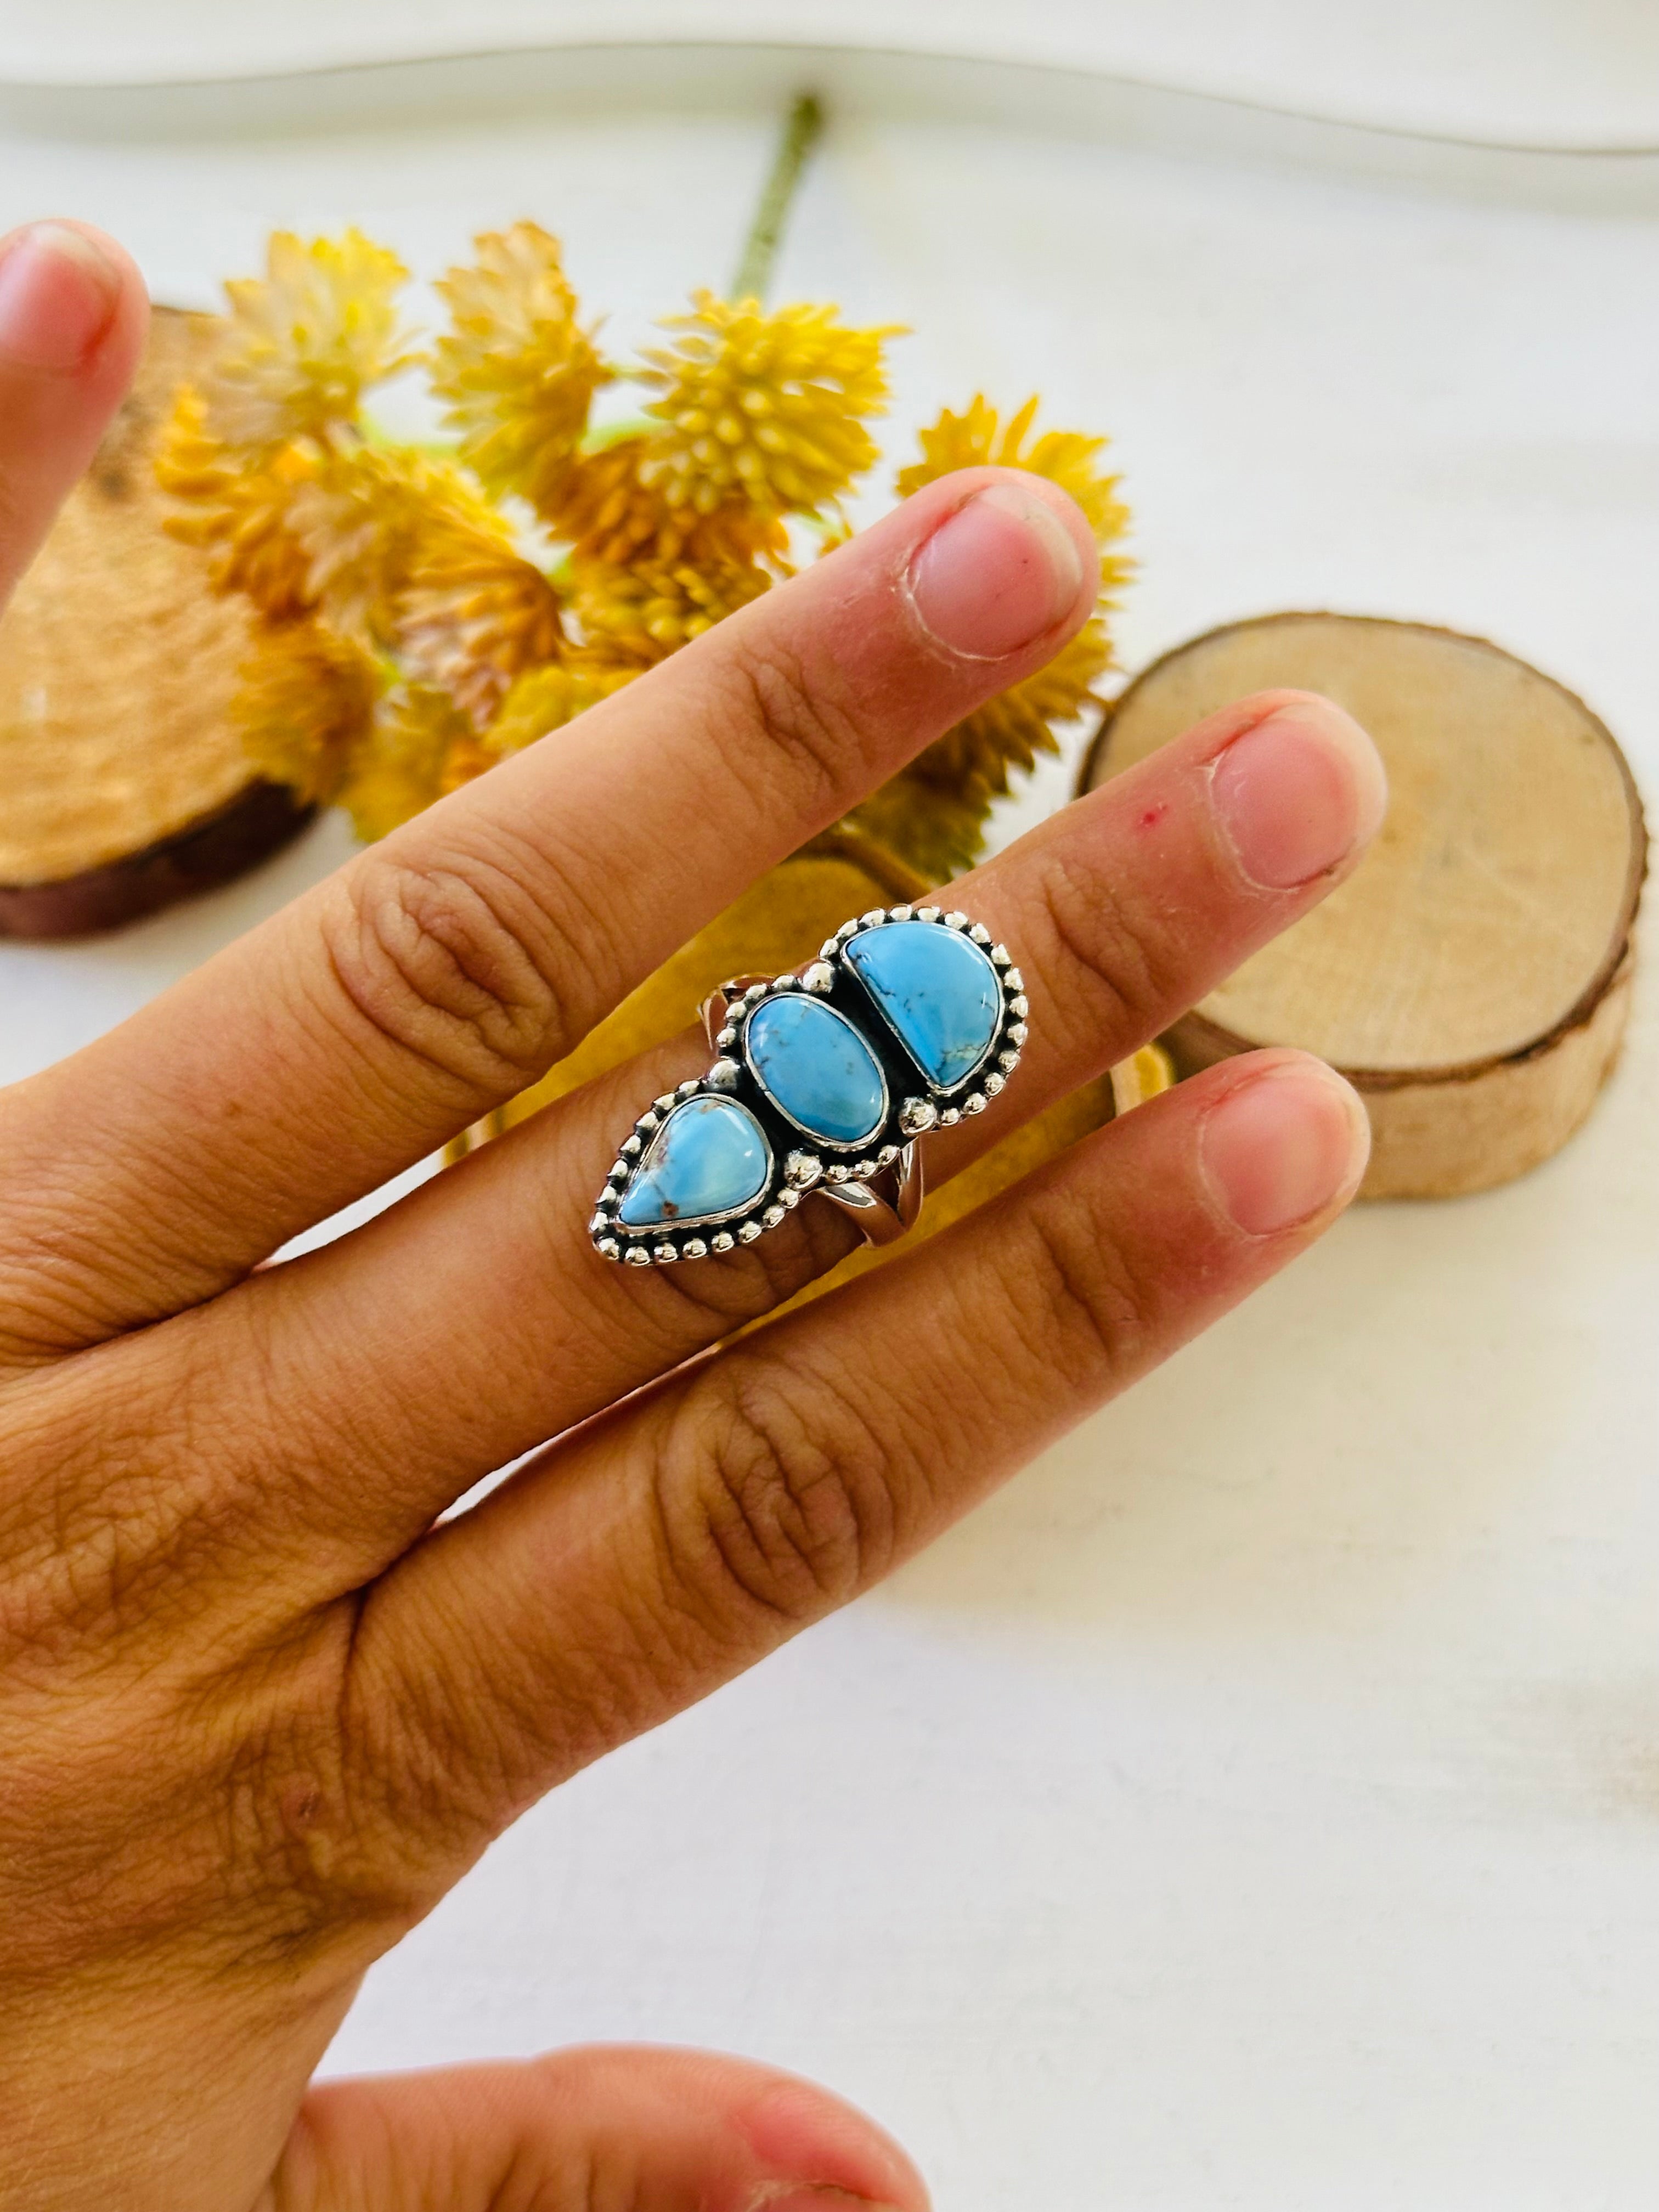 Southwest Handmade Golden Hills Turquoise & Sterling Silver Ring Size 6.5